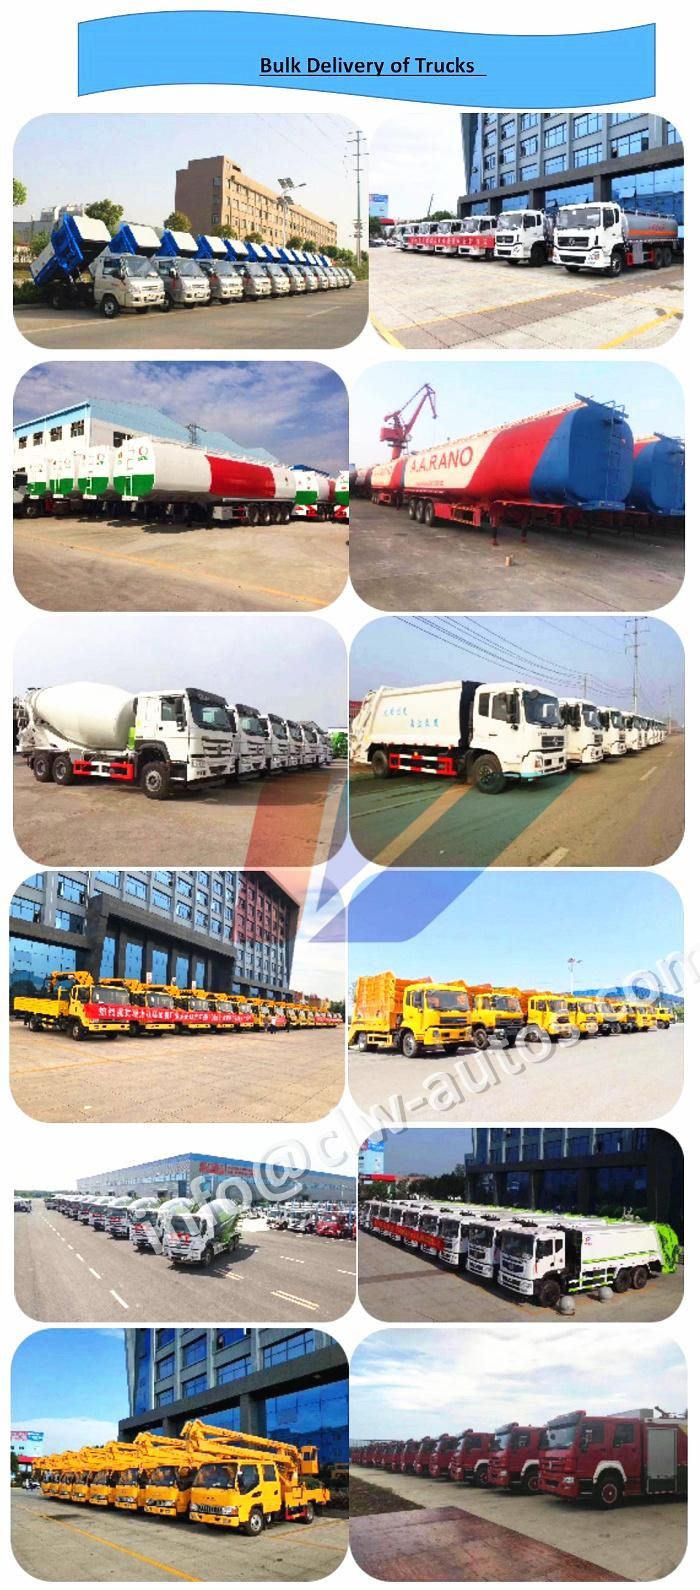 Dongfeng Brand 22m 25m High Altitude Work Folding Arm Truck with Hydraulic Lift Workset Aerial Work Truck